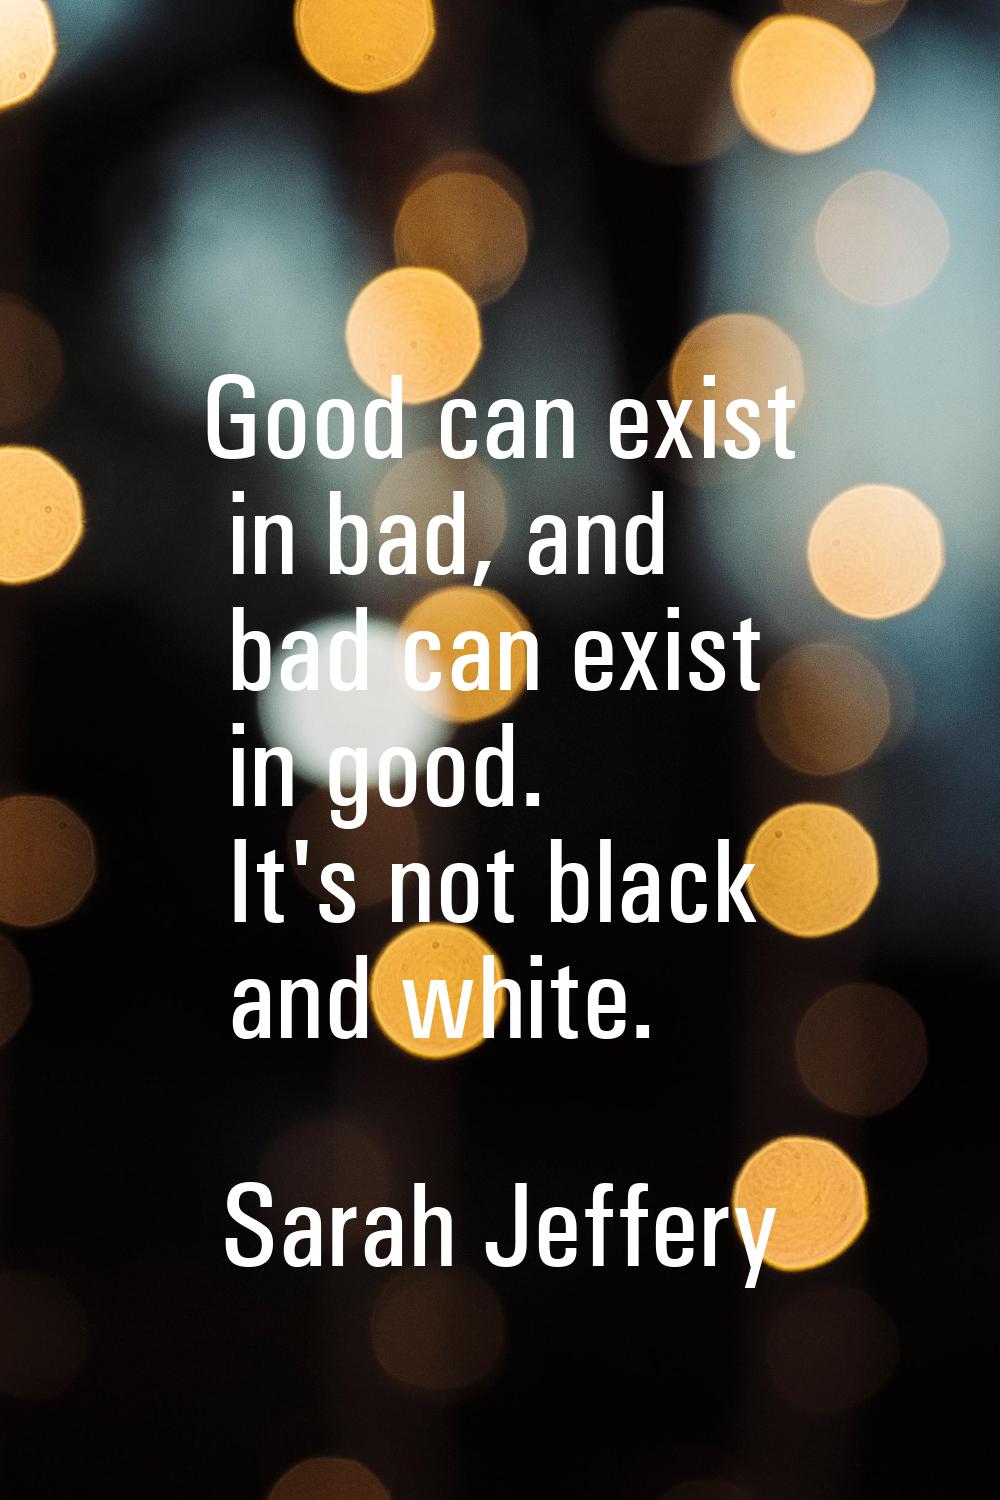 Good can exist in bad, and bad can exist in good. It's not black and white.